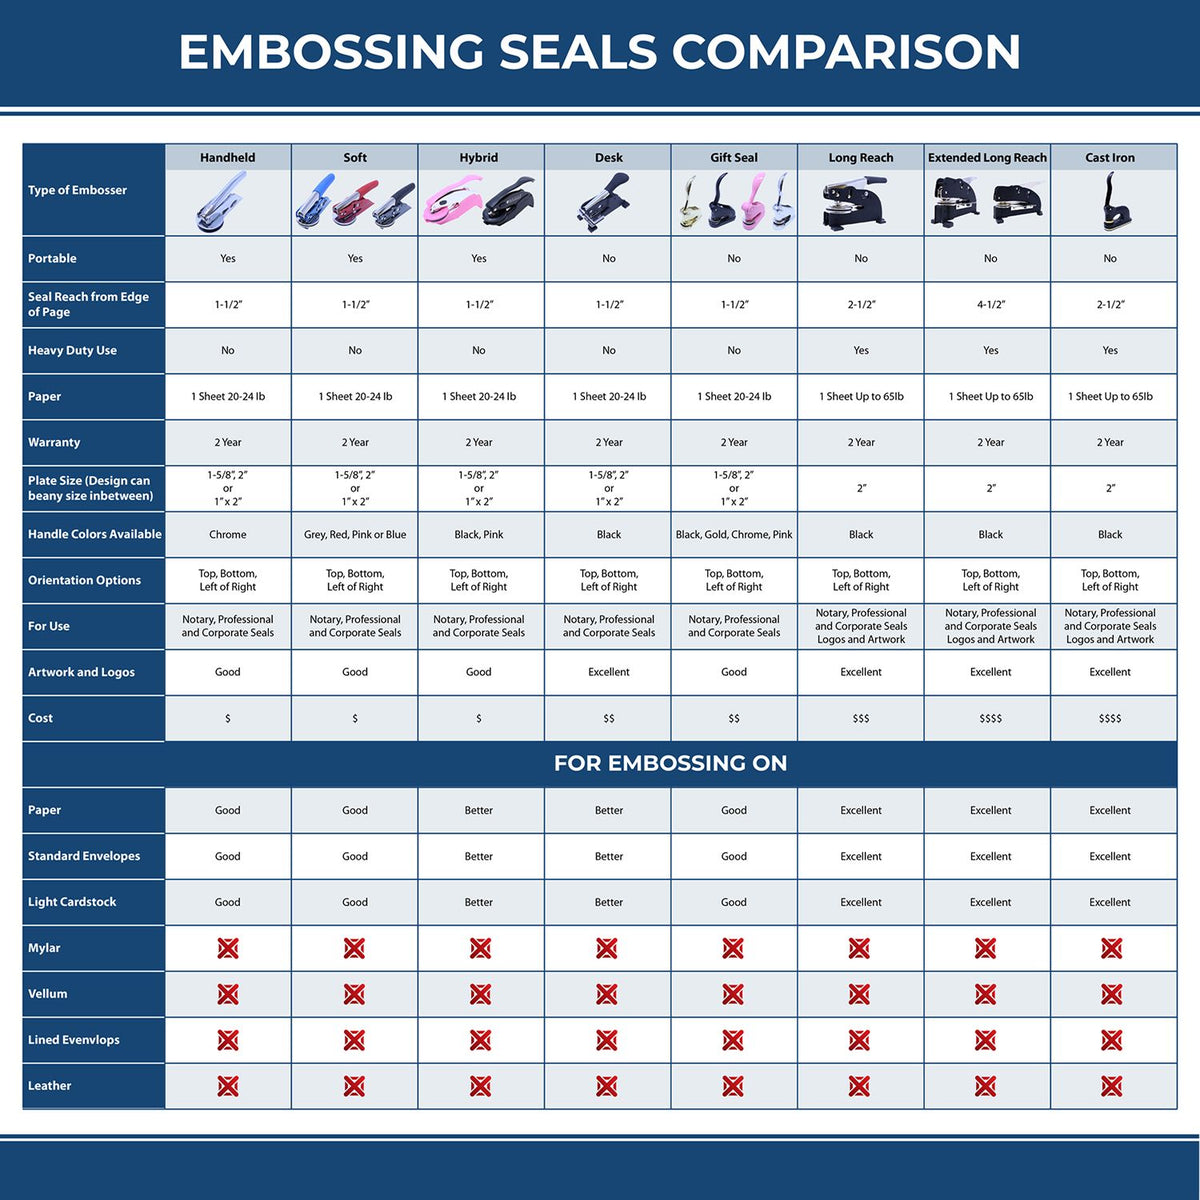 A comparison chart for the different types of mount models available for the Long Reach Nevada Land Surveyor Seal.